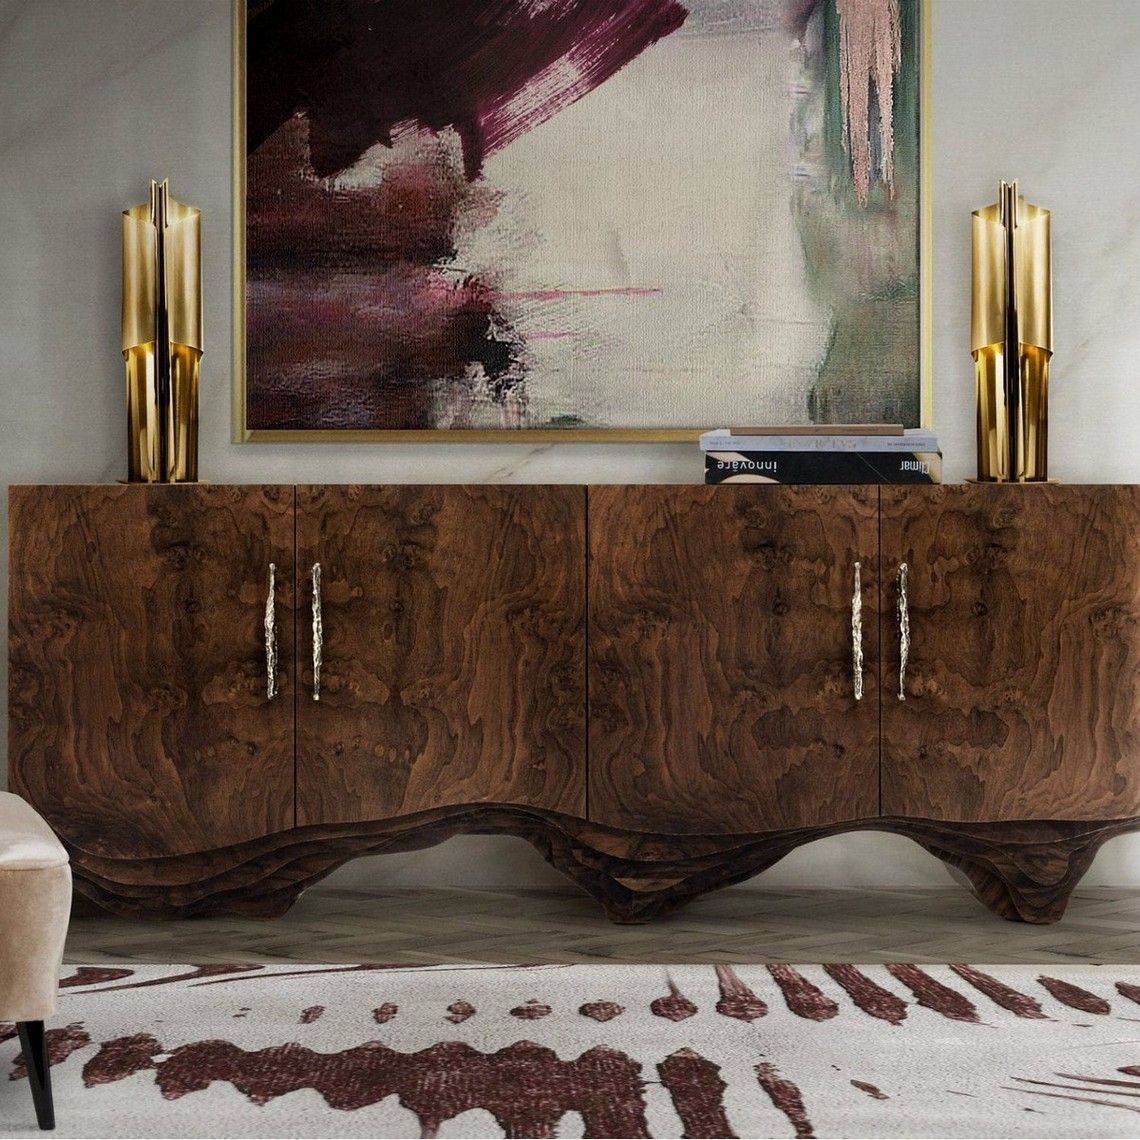 Trendy Sideboards For 2019 (part Ii) | Modern Home Decor With Regard To Armino Sideboards (View 6 of 22)